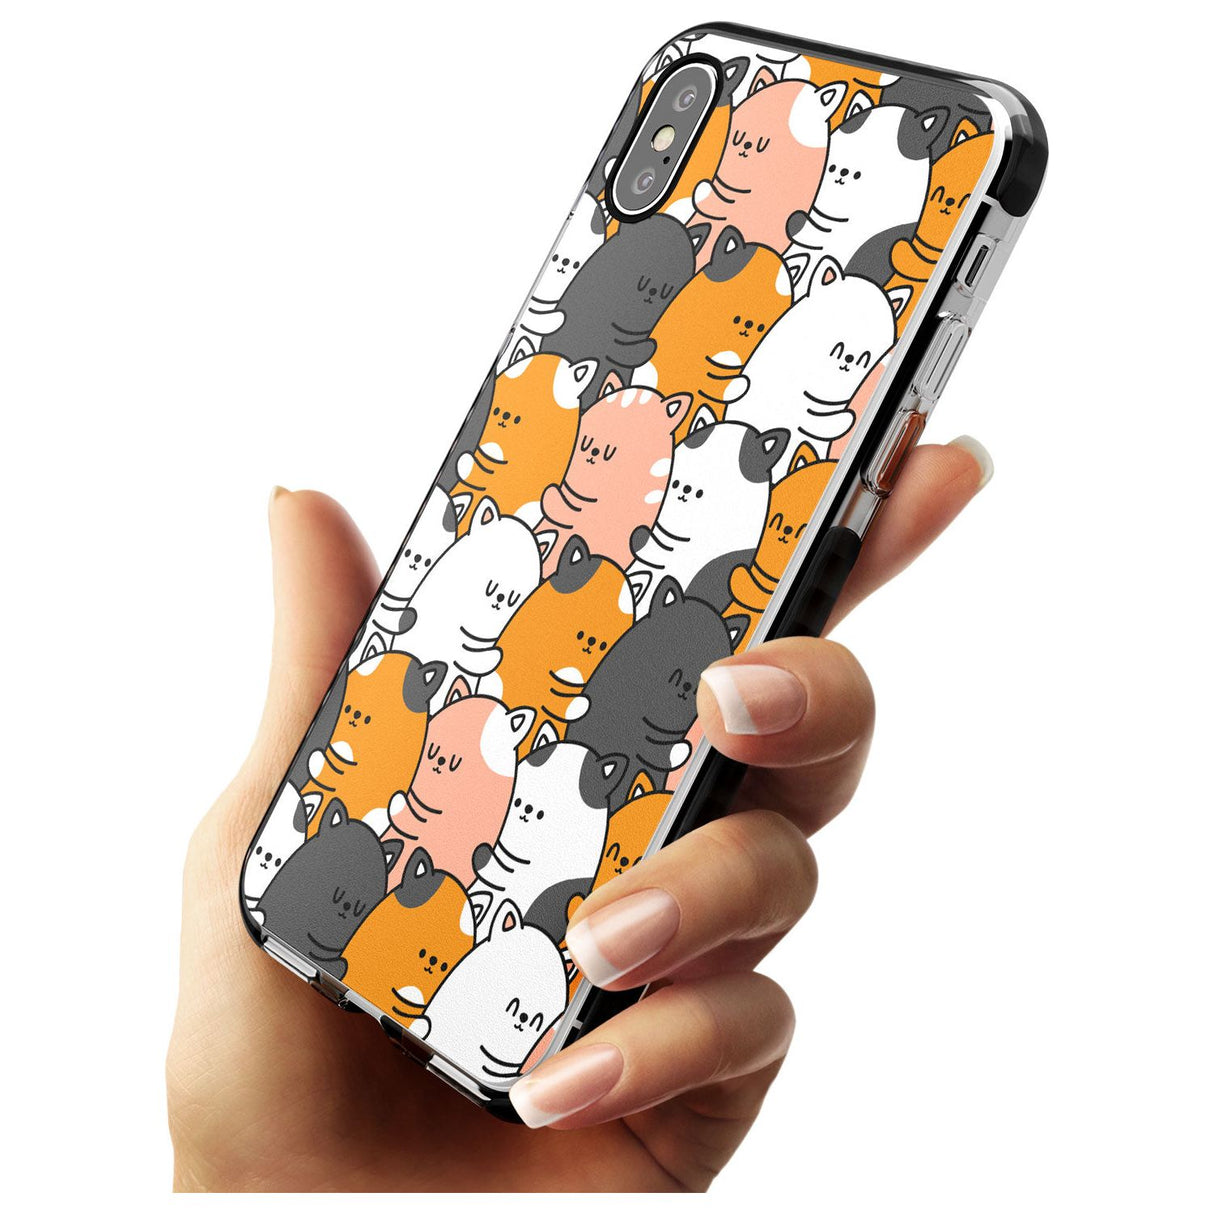 Spooning Cats Kawaii Pattern Black Impact Phone Case for iPhone X XS Max XR